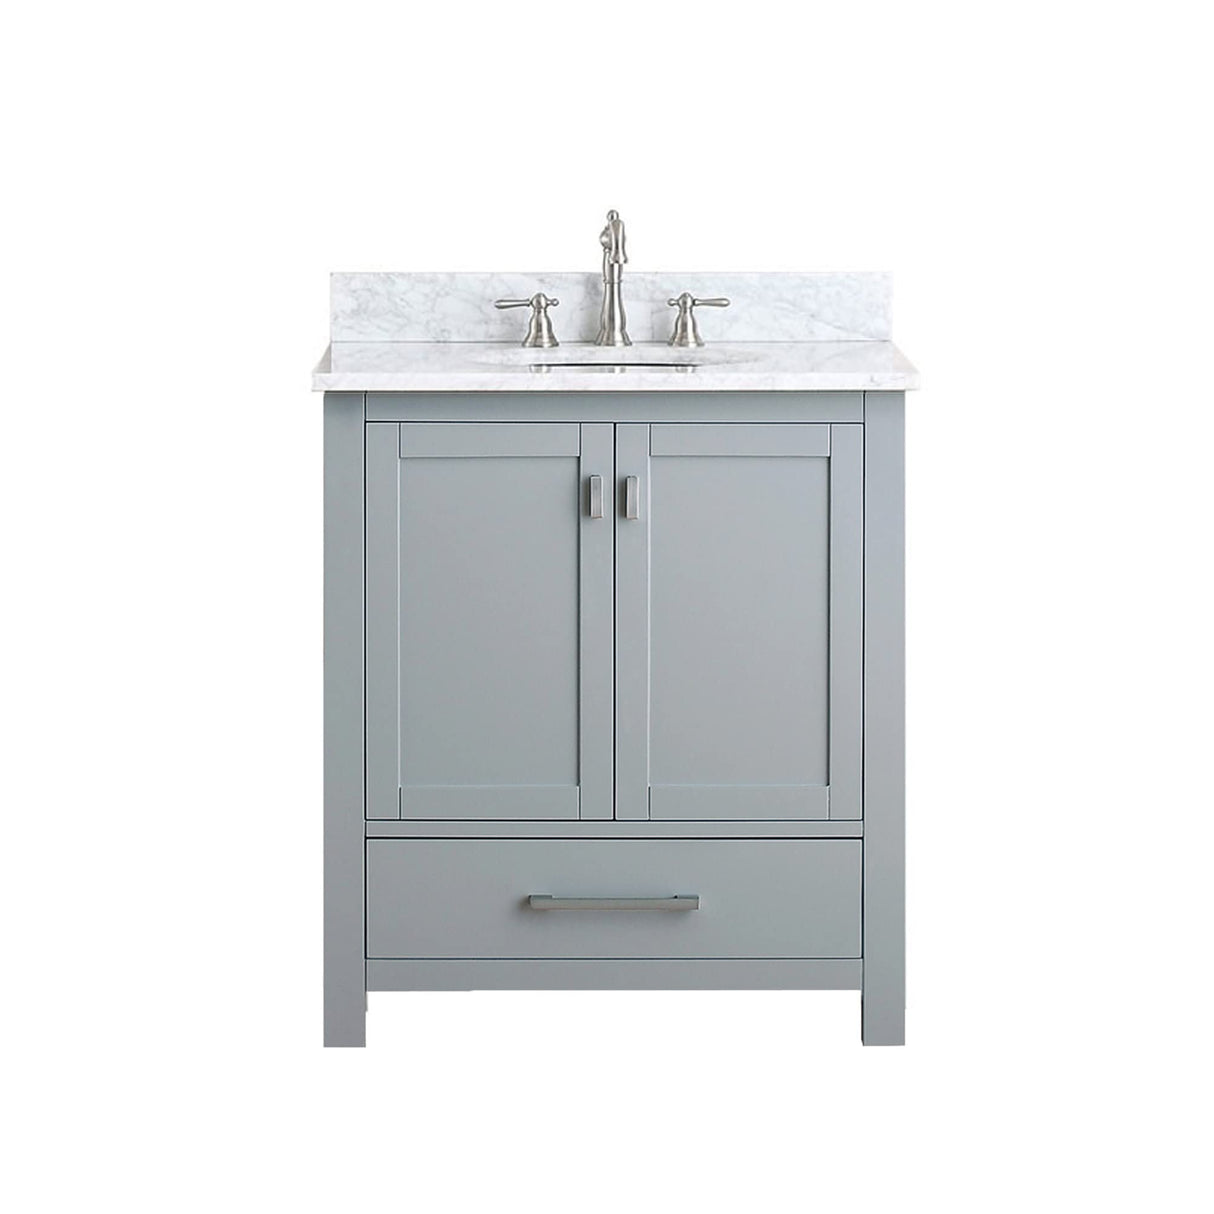 Avanity Modero 31 in. Vanity in Chilled Gray finish with Carrara White Marble Top